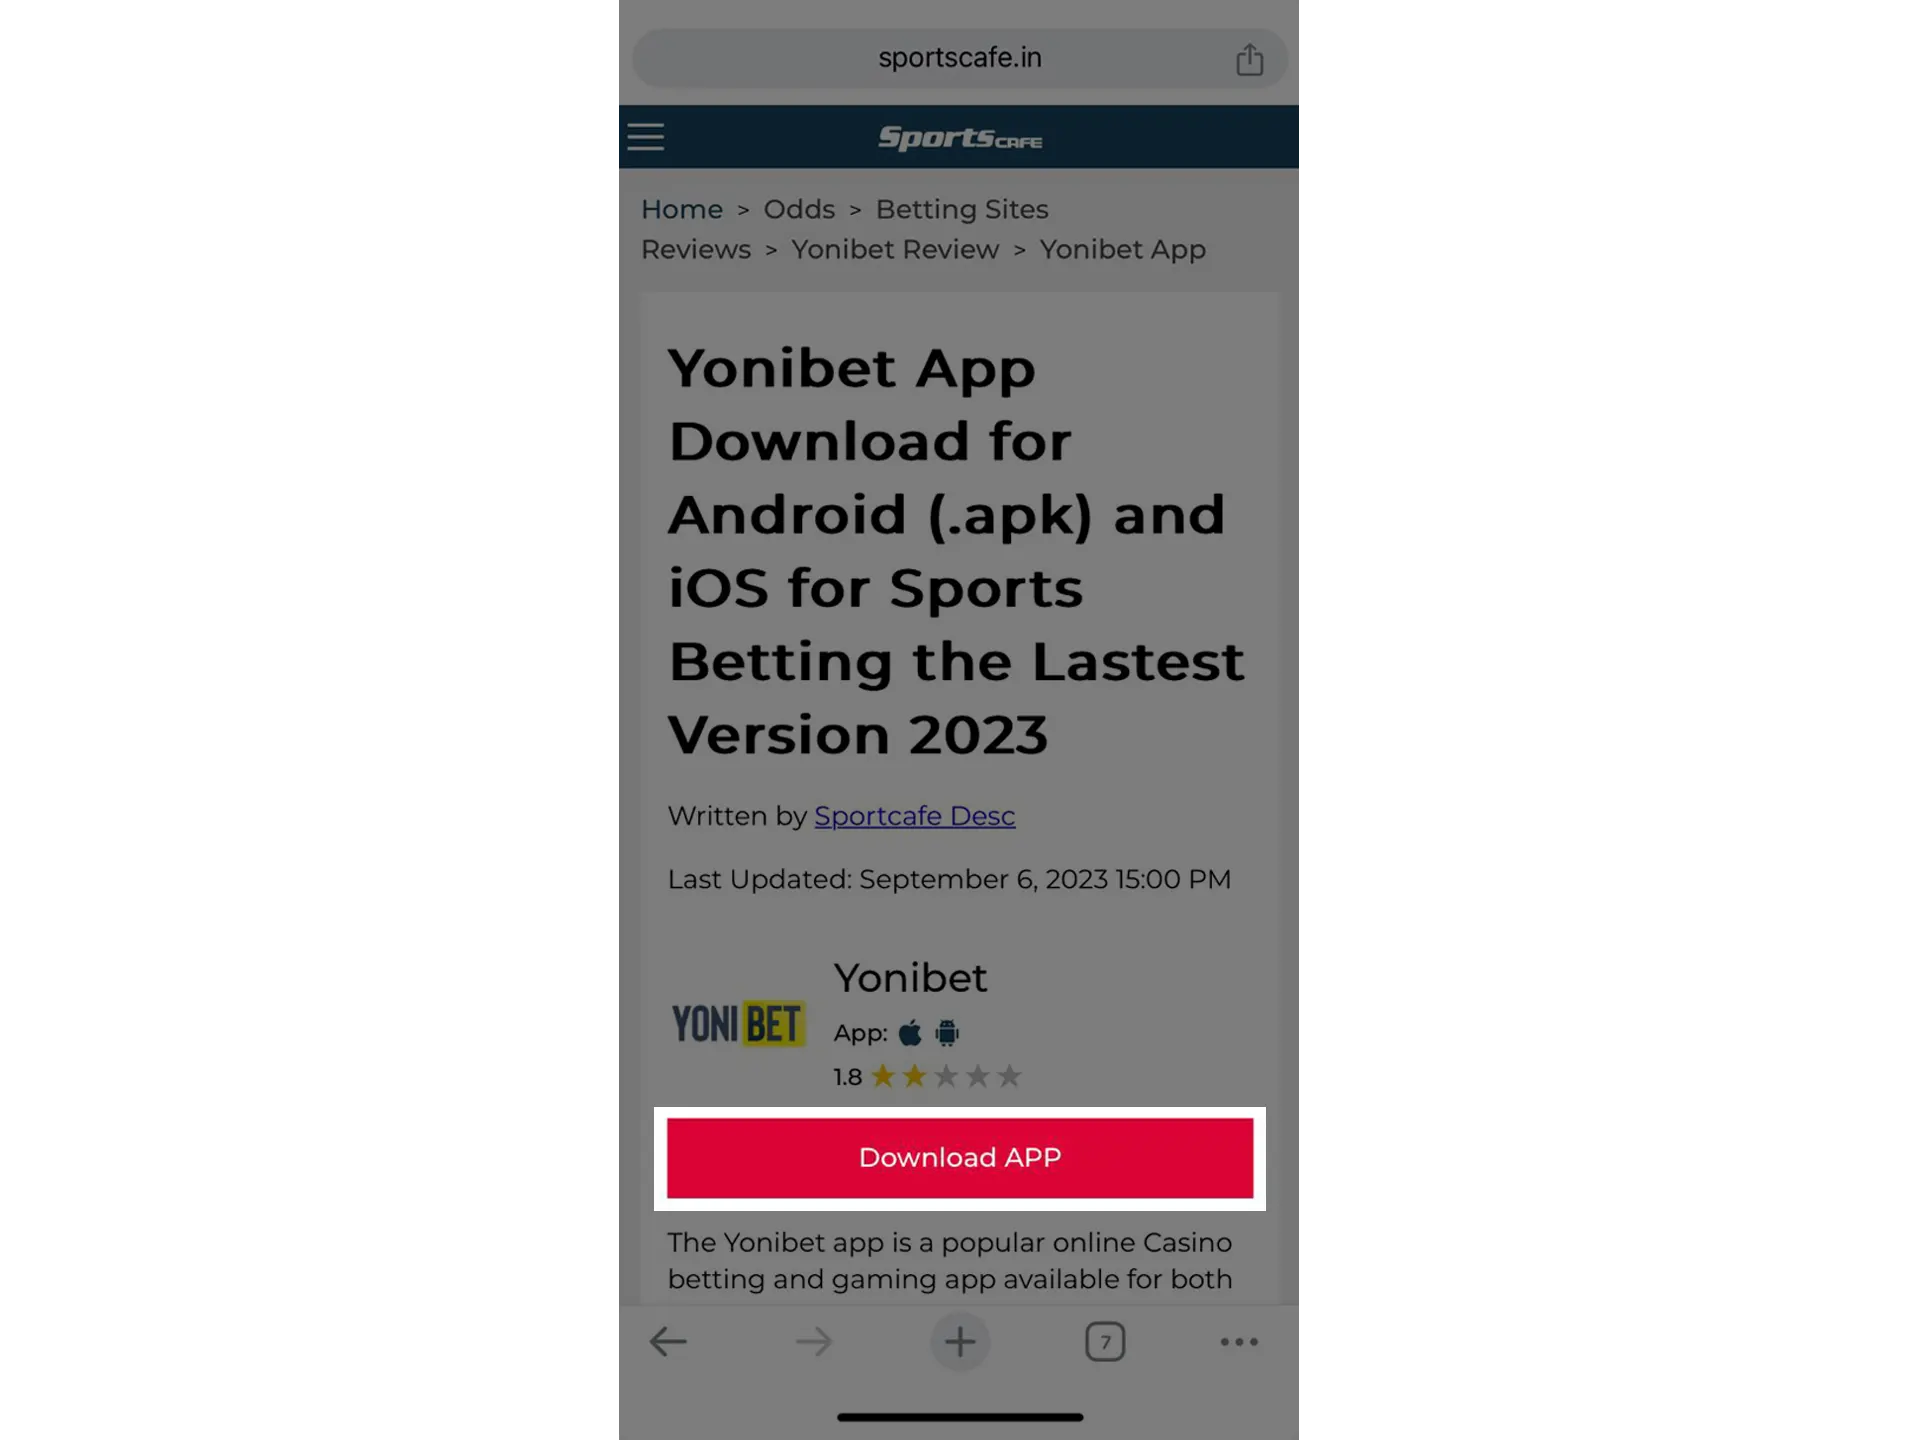 Follow the link to go to the official website of Yonibet.